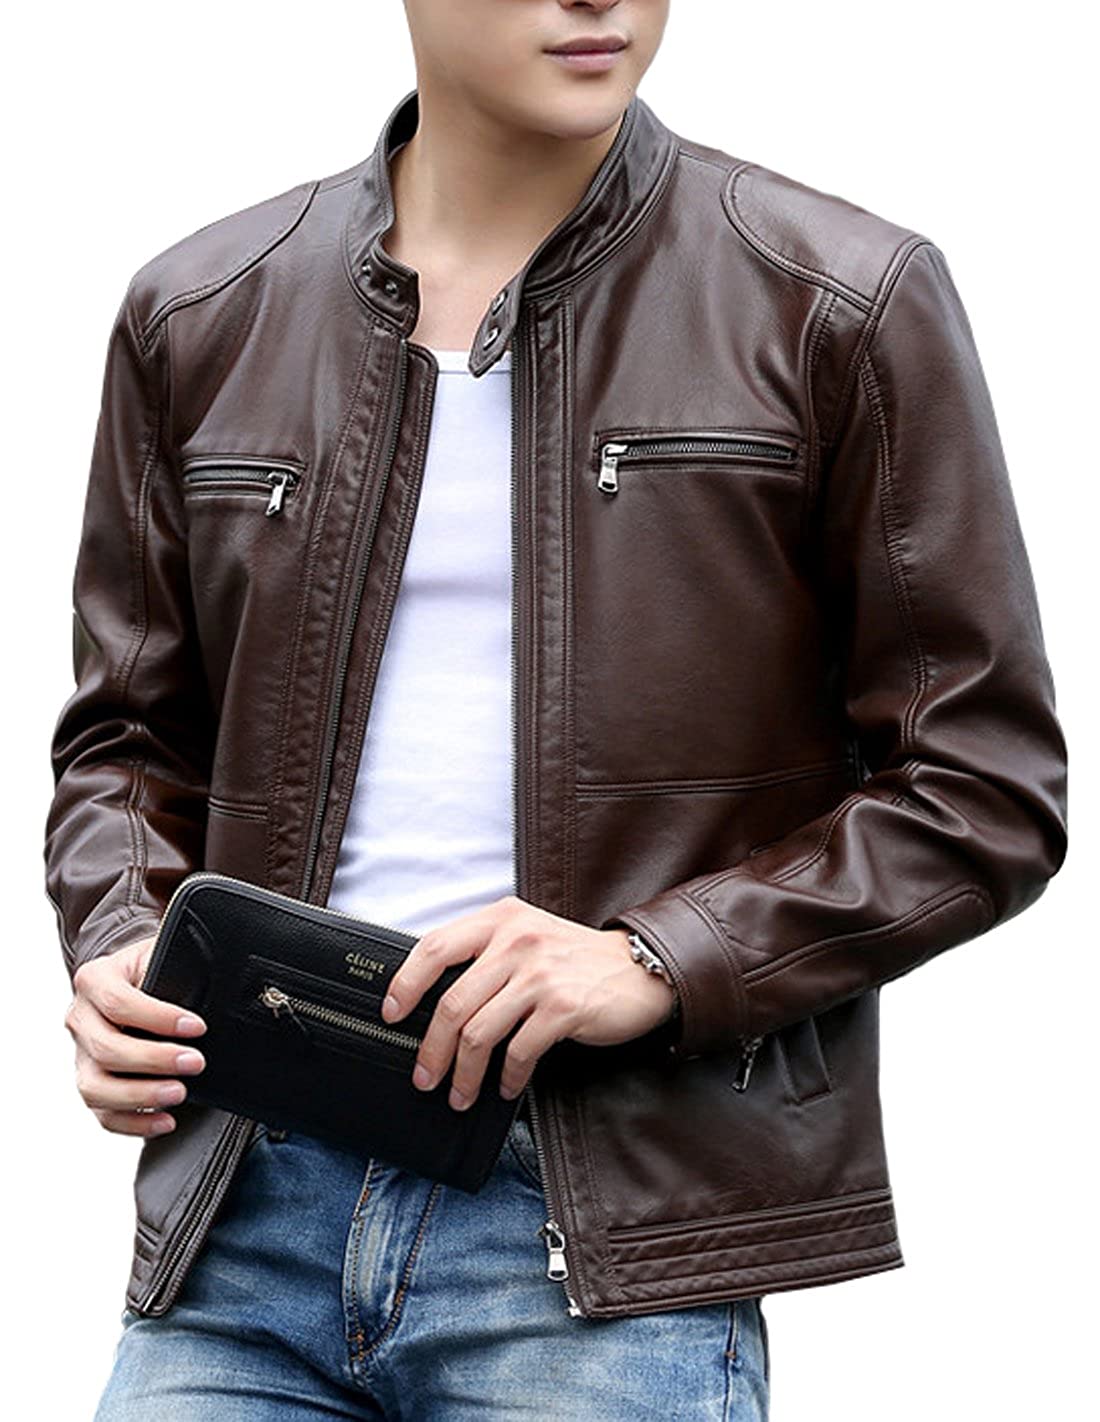 Top 10 Best Leather Jacket Brands in India 2020 » StylesXP